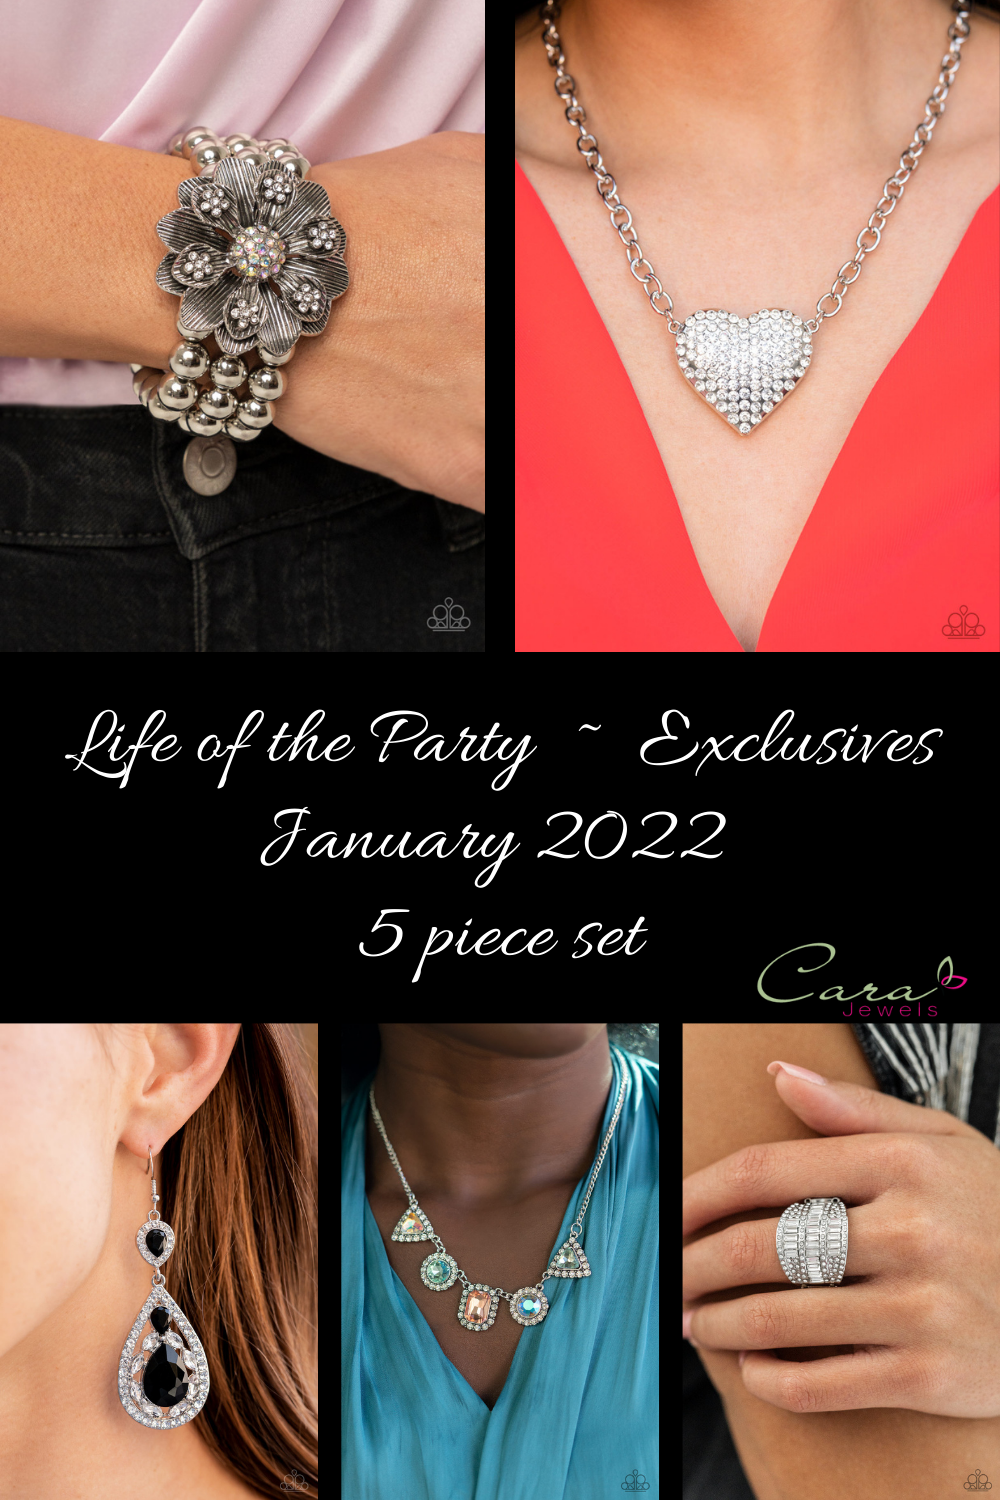 Life of the Party Exclusives January 2022 - 5 piece set - Paparazzi Accessories- lightbox - CarasShop.com - $5 Jewelry by Cara Jewels